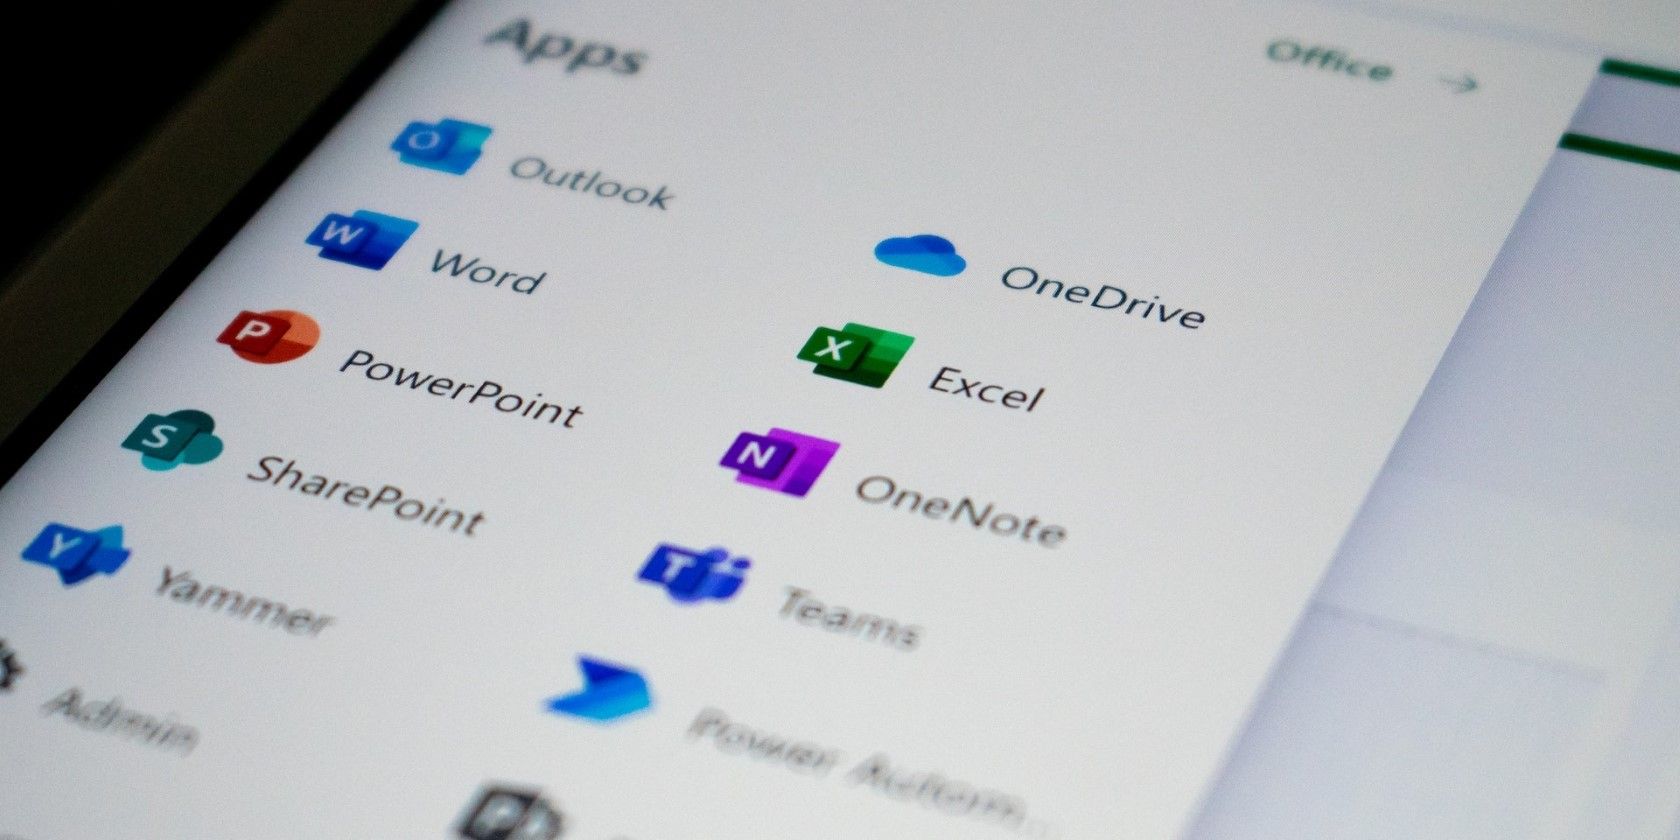 A Close Up Of Office Apps On A Screen.jpg